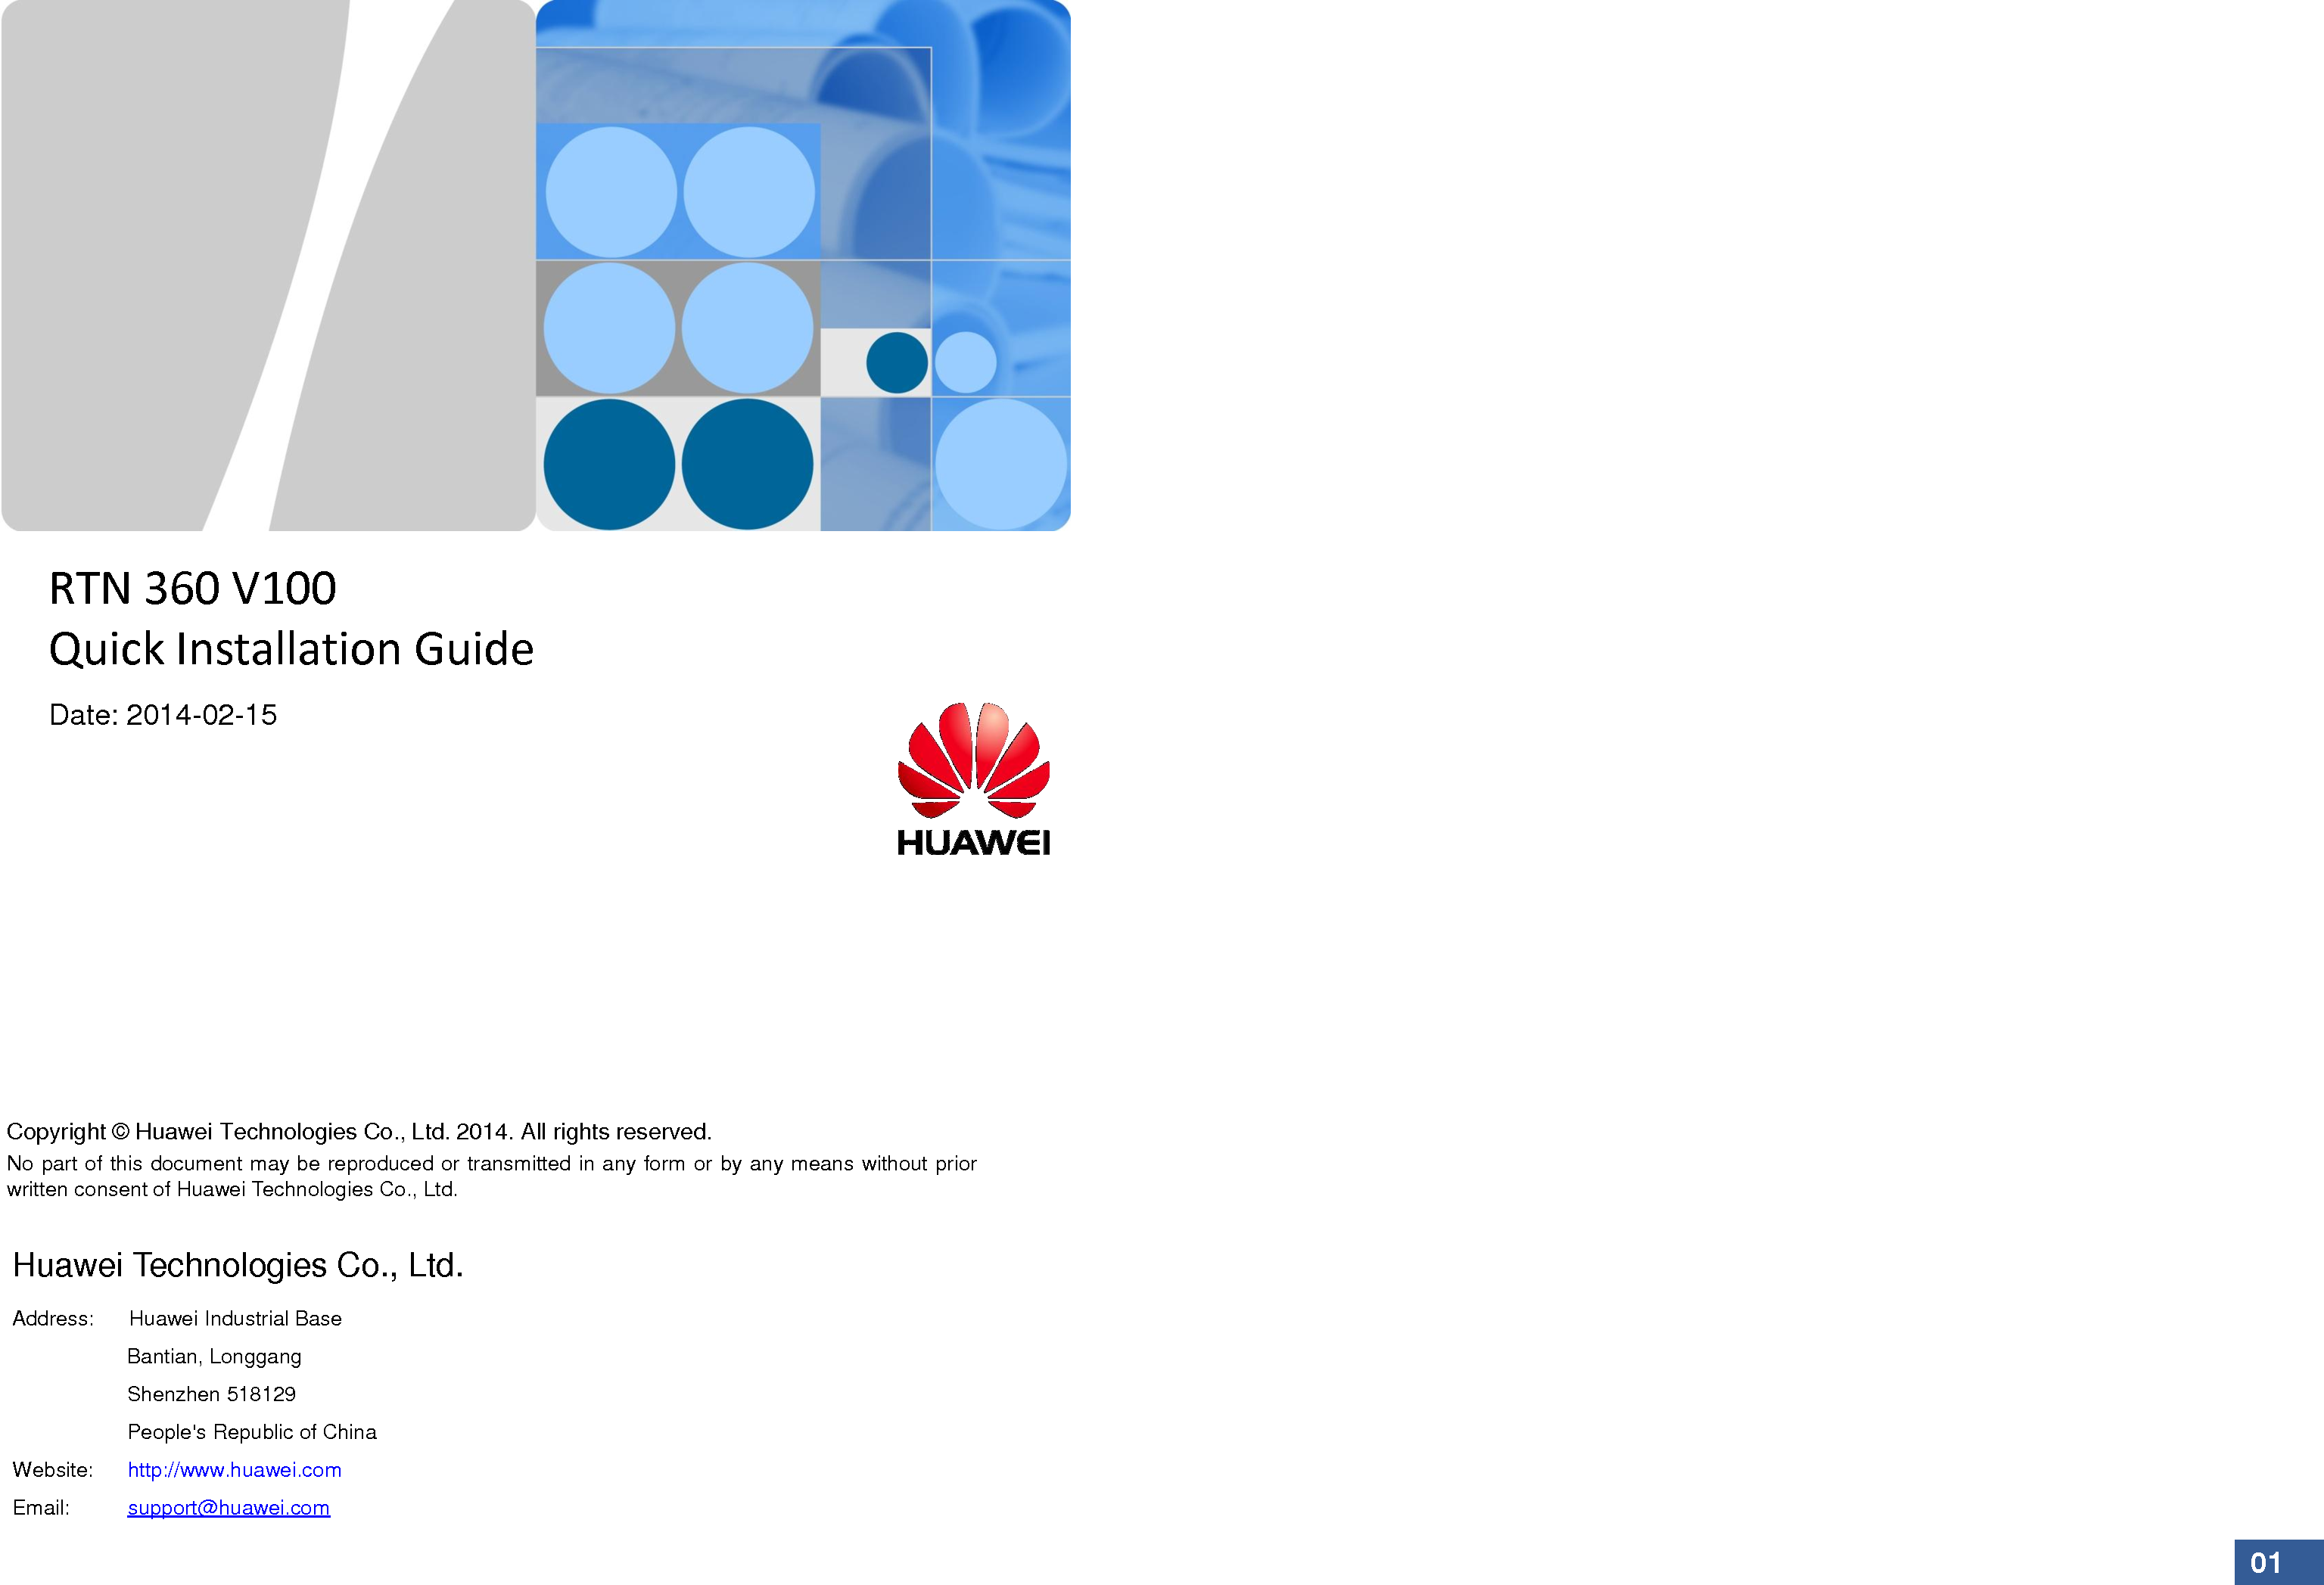 01 RTN 360 V100 Quick Installation Guide Date: 2014-02-15 Huawei Technologies Co., Ltd. Address:      Huawei Industrial Base                      Bantian, Longgang                      Shenzhen 518129                      People&apos;s Republic of China Website:      http://www.huawei.com Email:          support@huawei.com  No part of this document may be reproduced or transmitted in any form or by any means without prior written consent of Huawei Technologies Co., Ltd. Copyright © Huawei Technologies Co., Ltd. 2014. All rights reserved.   